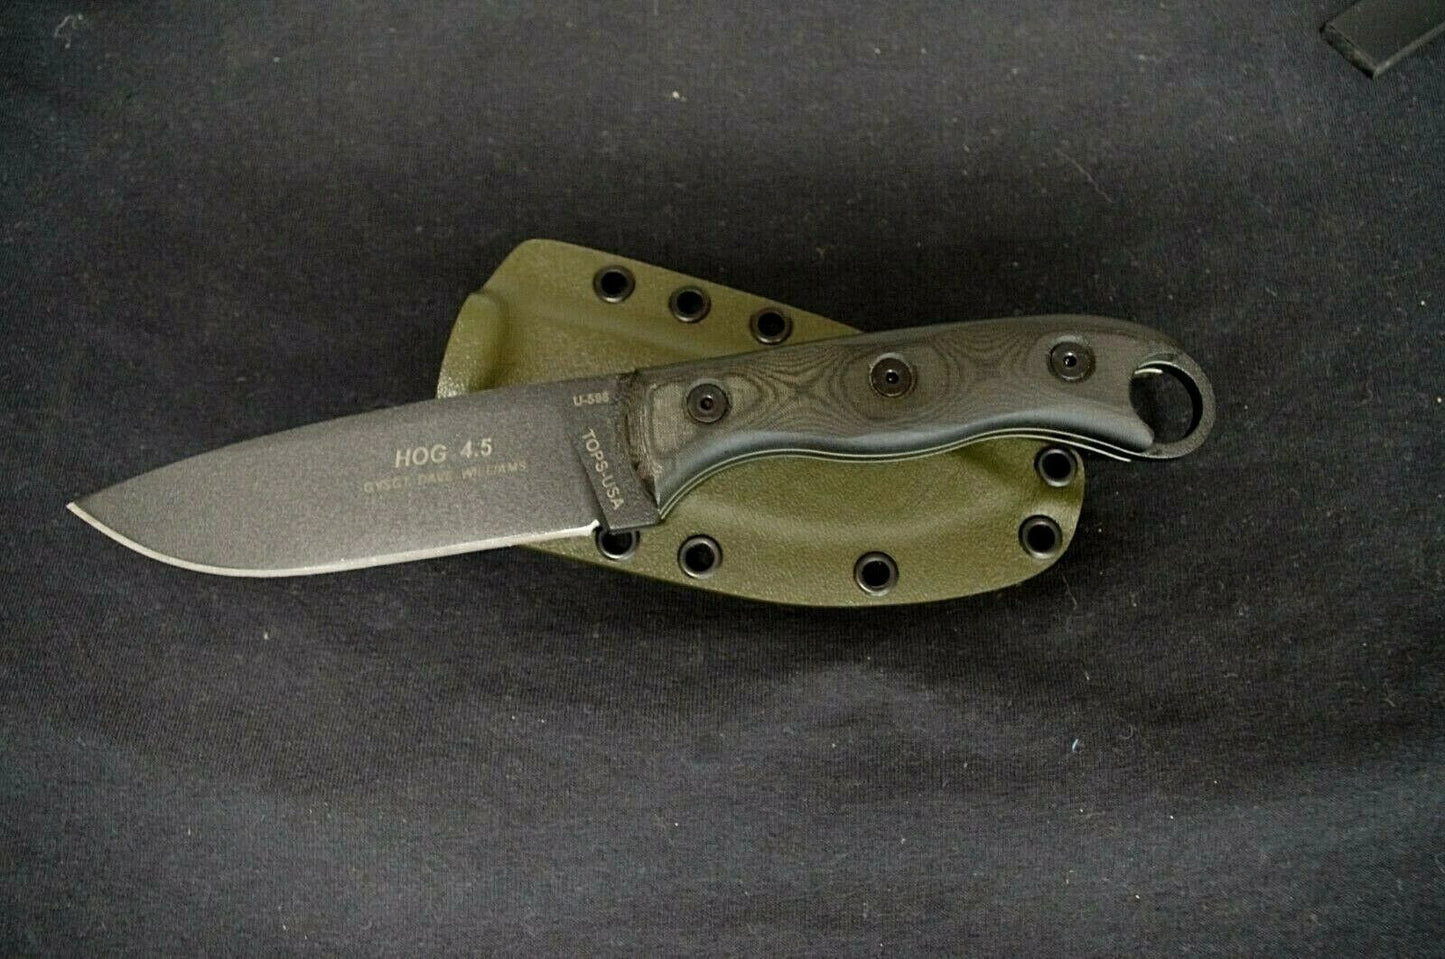 TOPS KNIVES HOG 4.5 CUSTOM .093 OD GREEN KYDEX SHEATH BY RED HILL SHEATHS **KNIFE NOT INCLUDED**